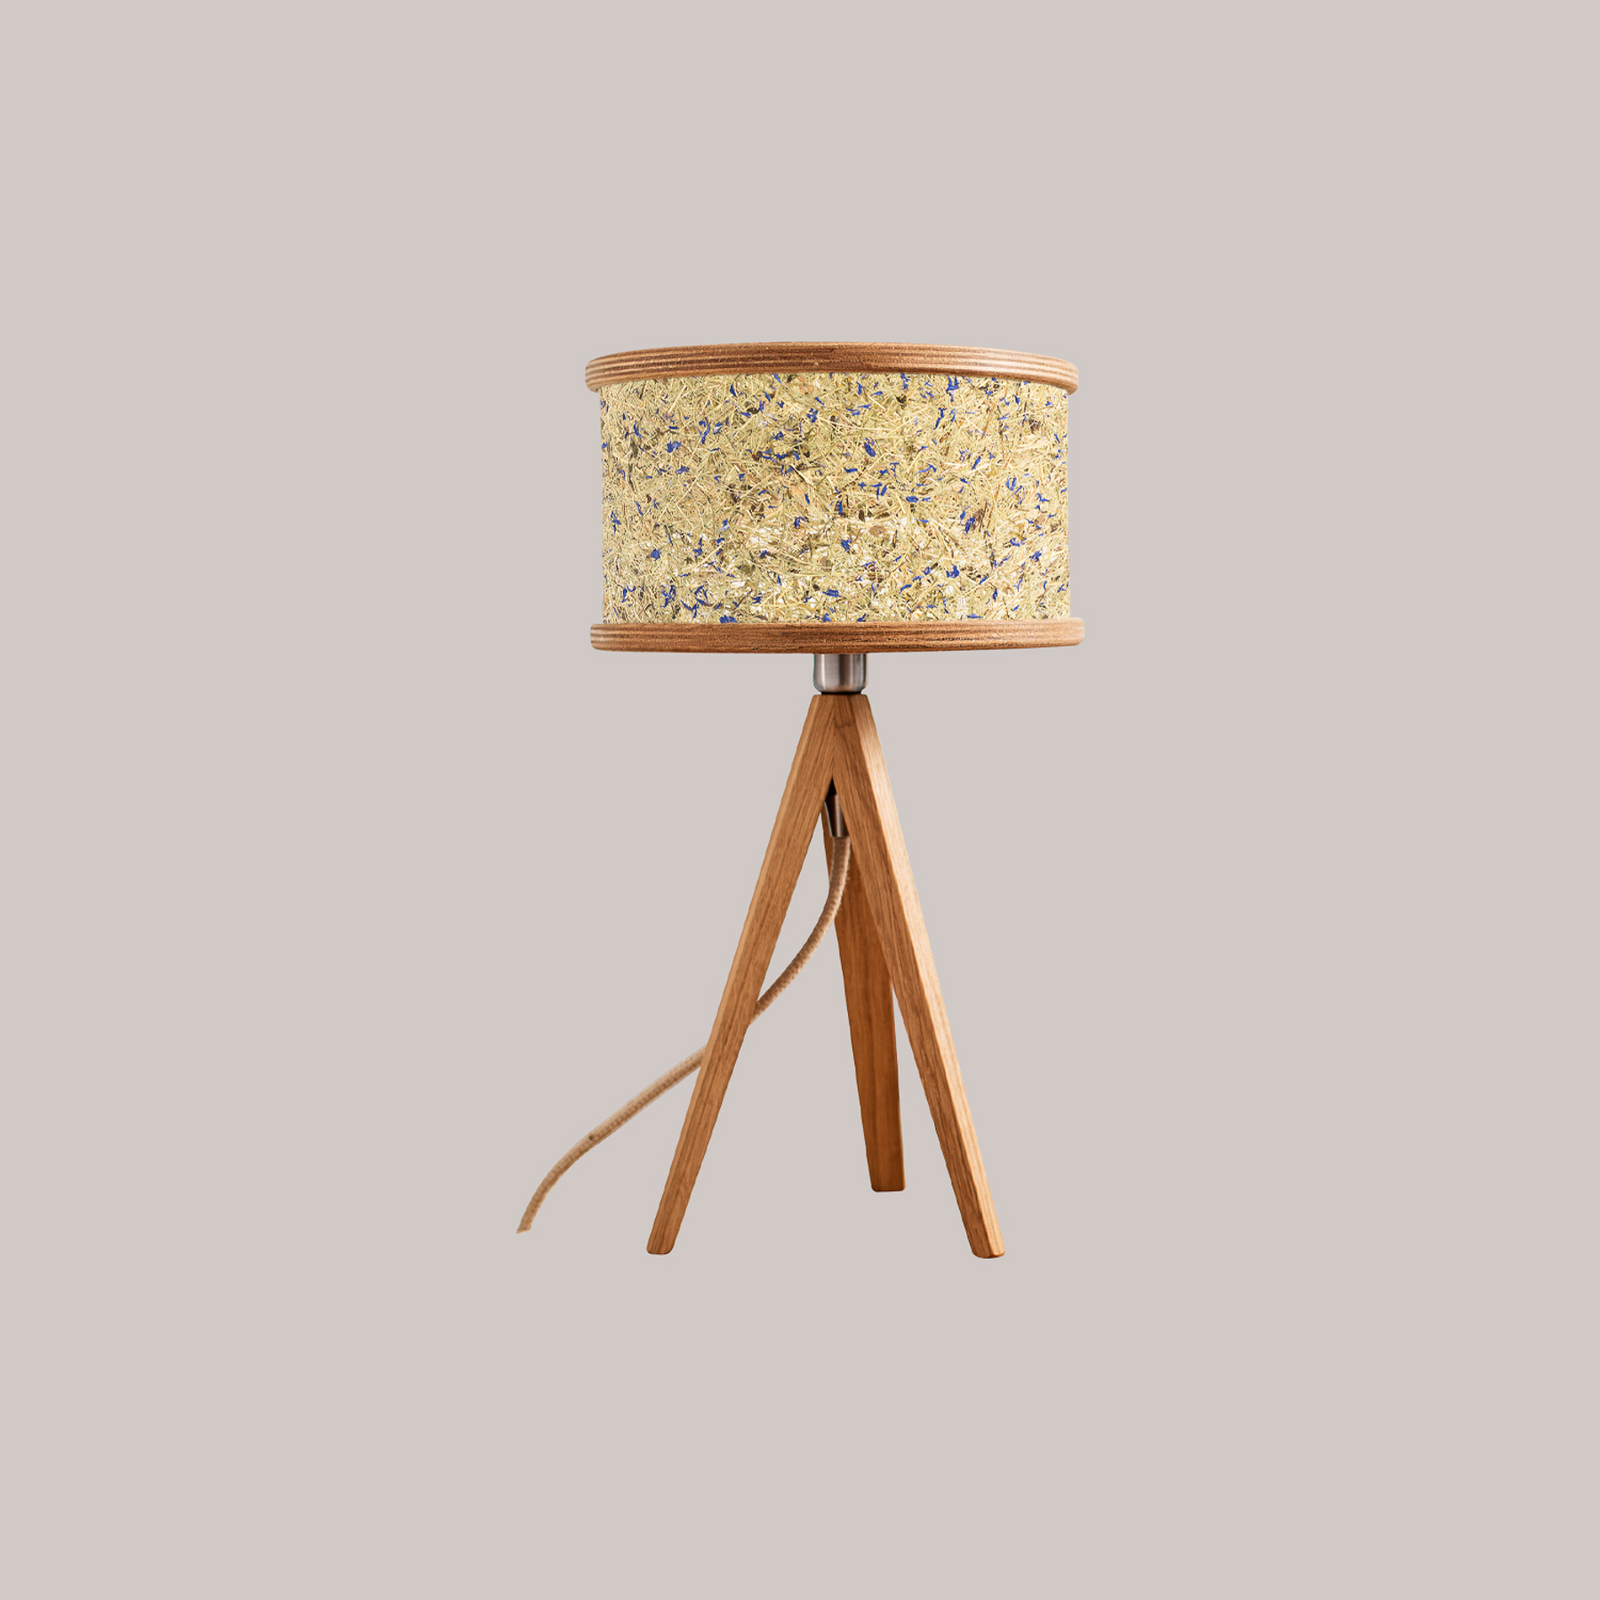 ALMUT 2610 table lamp, hay with blue cornflowers